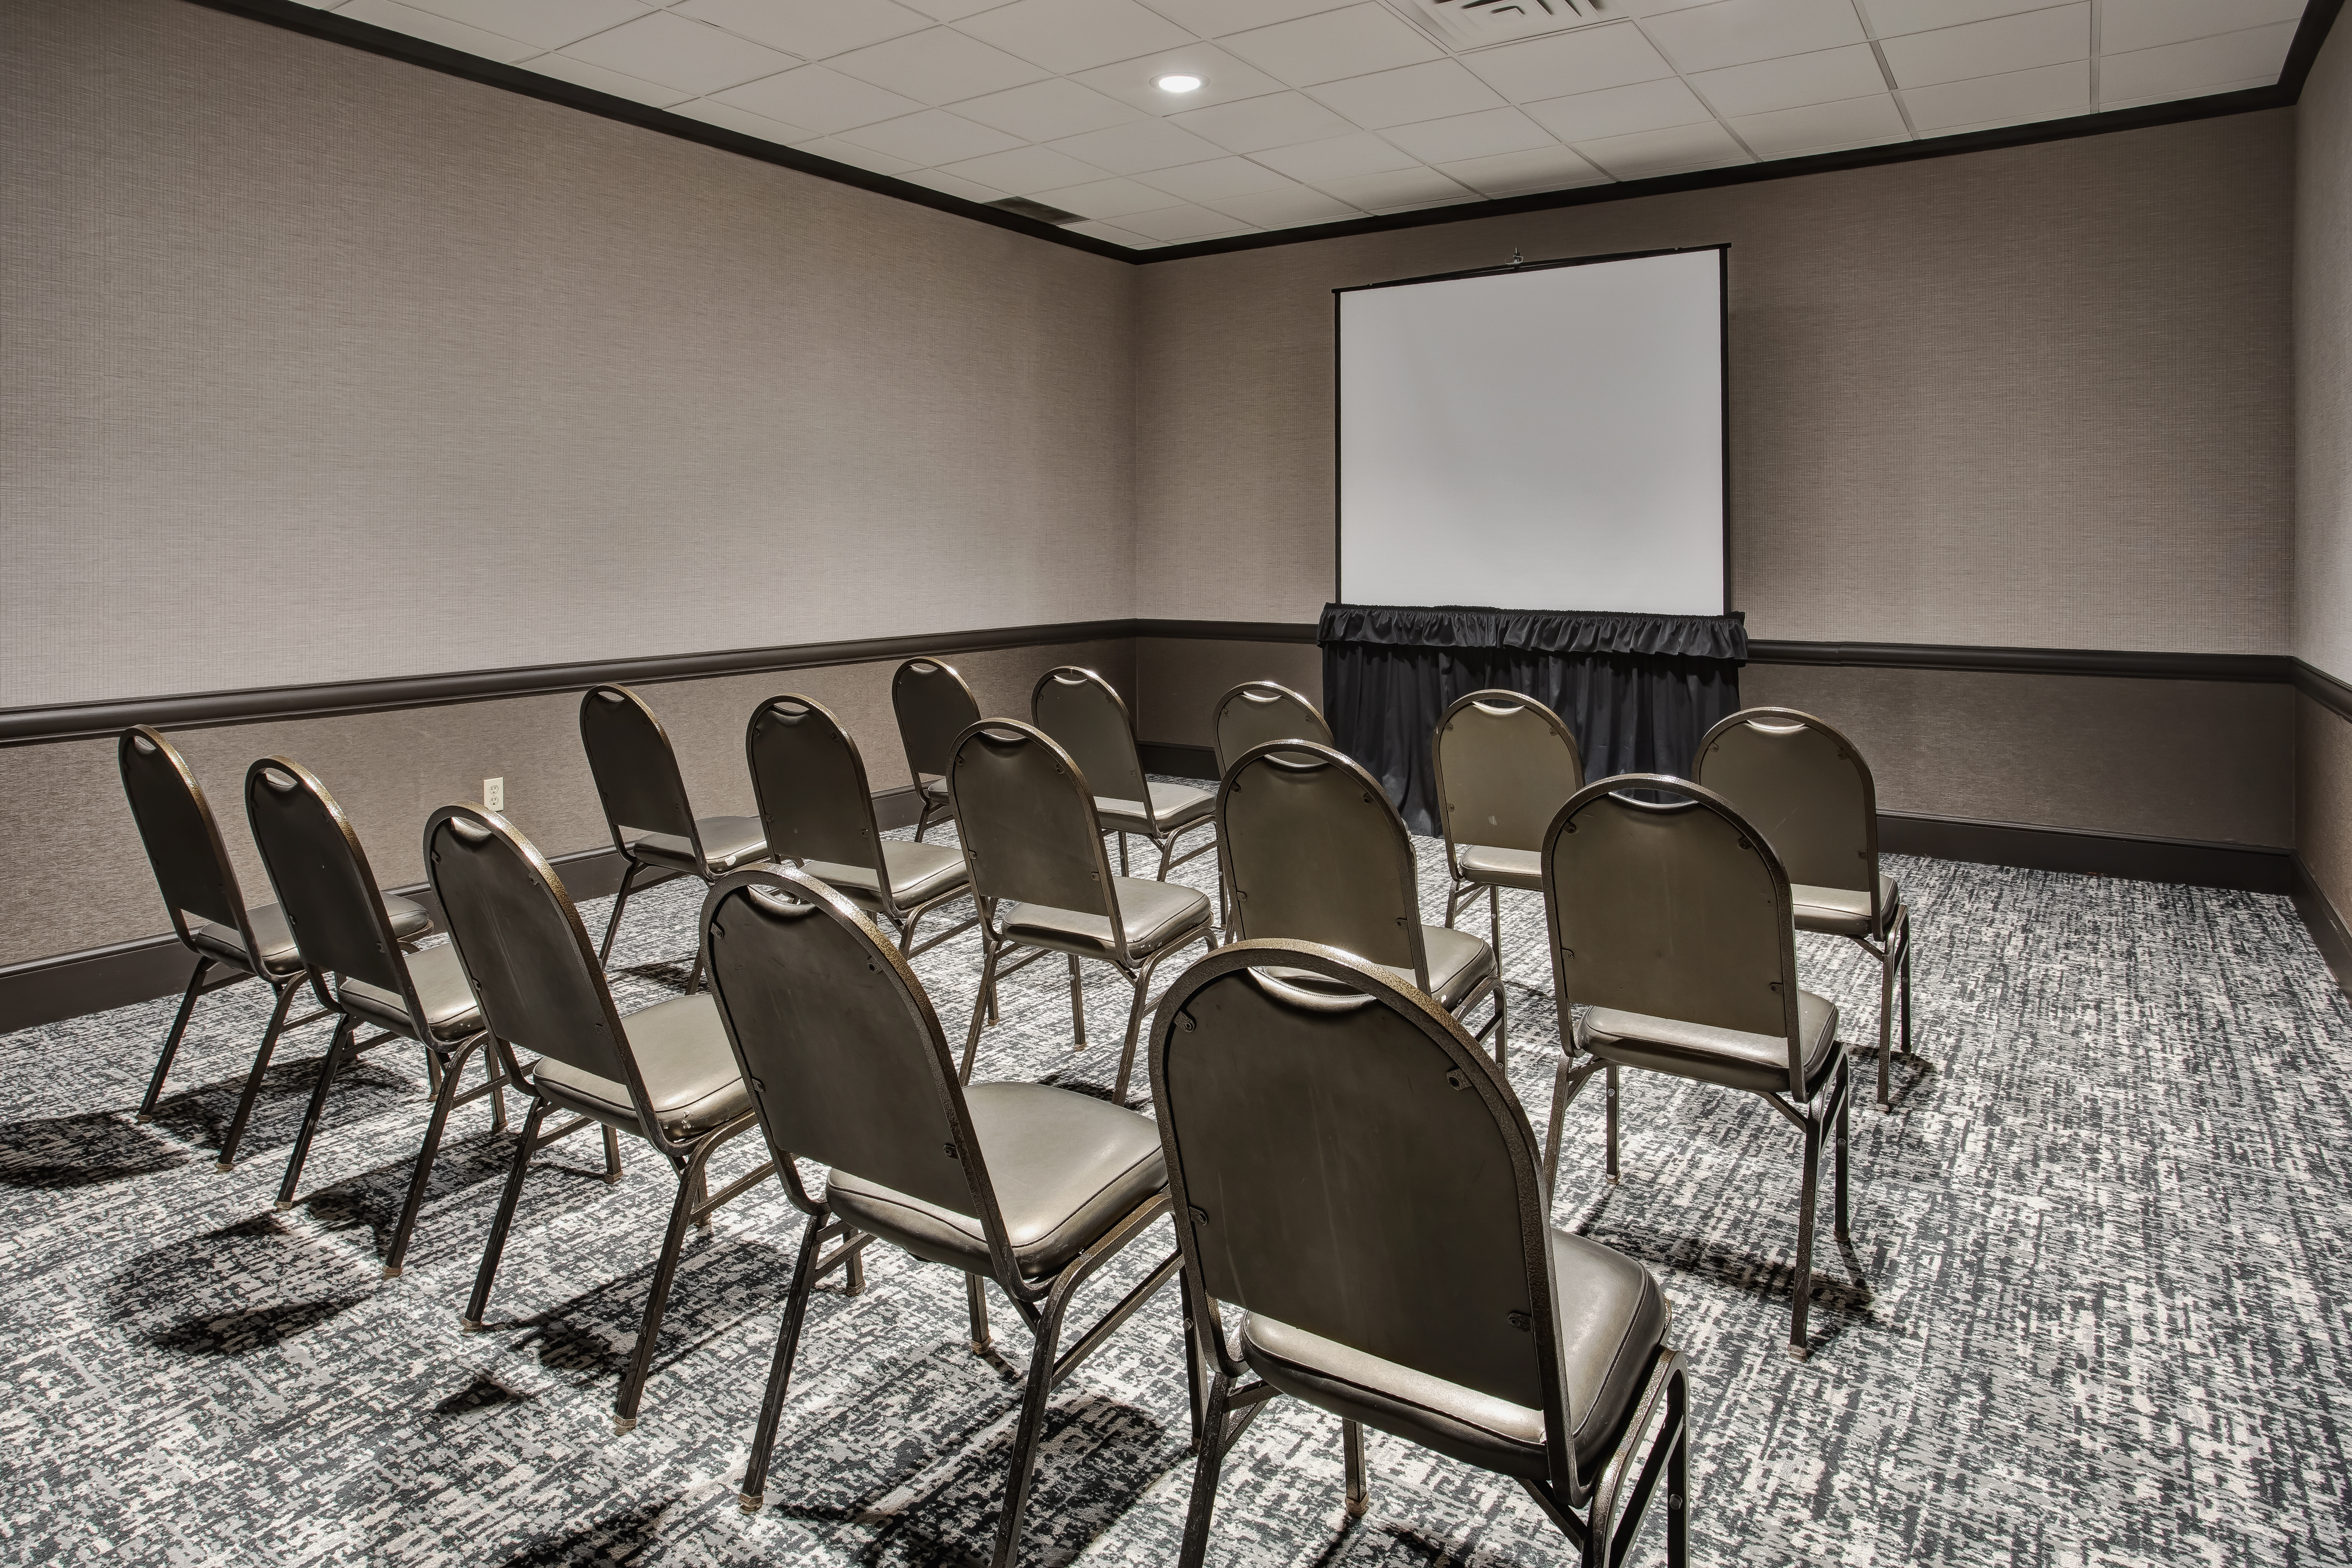 Meeting Room Setup Theater Style